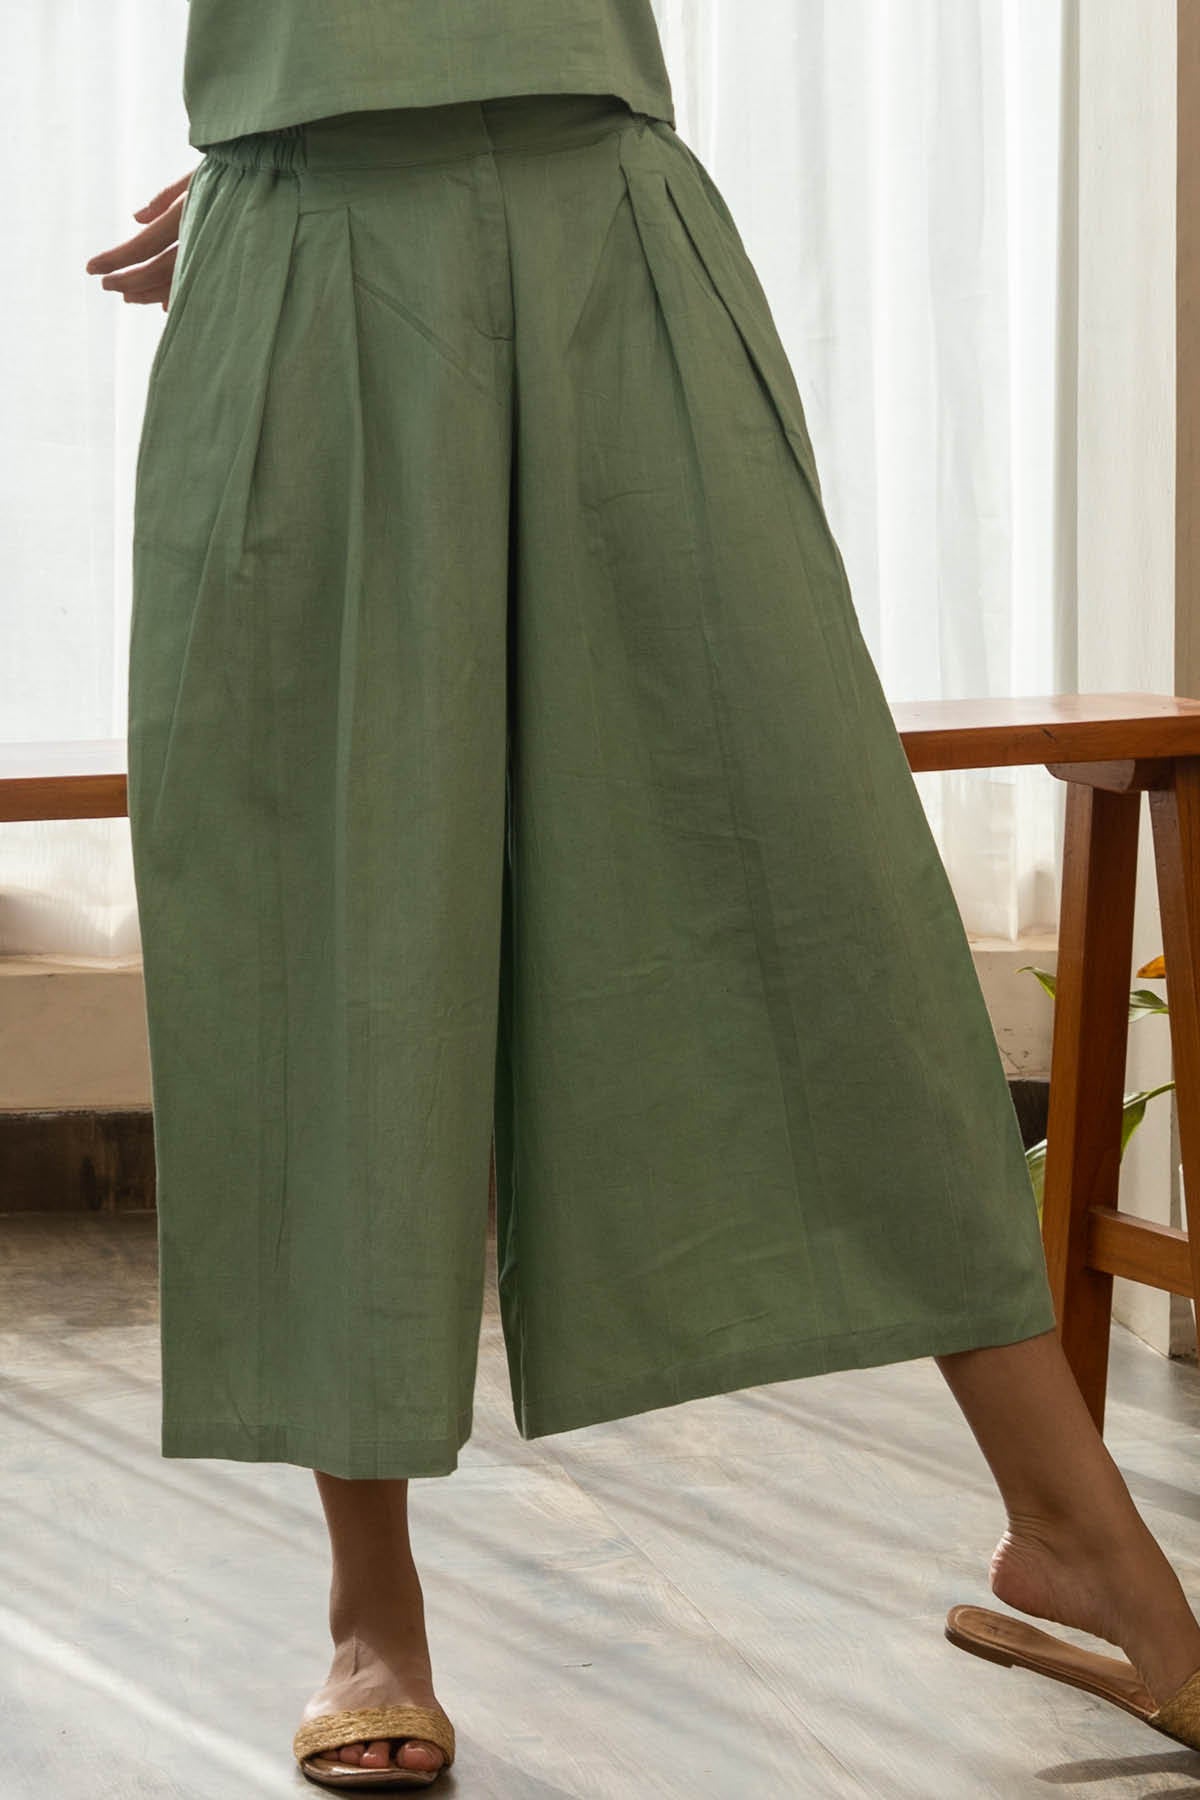 Ami Crop Top and Pleated Culottes - Sage Green Set